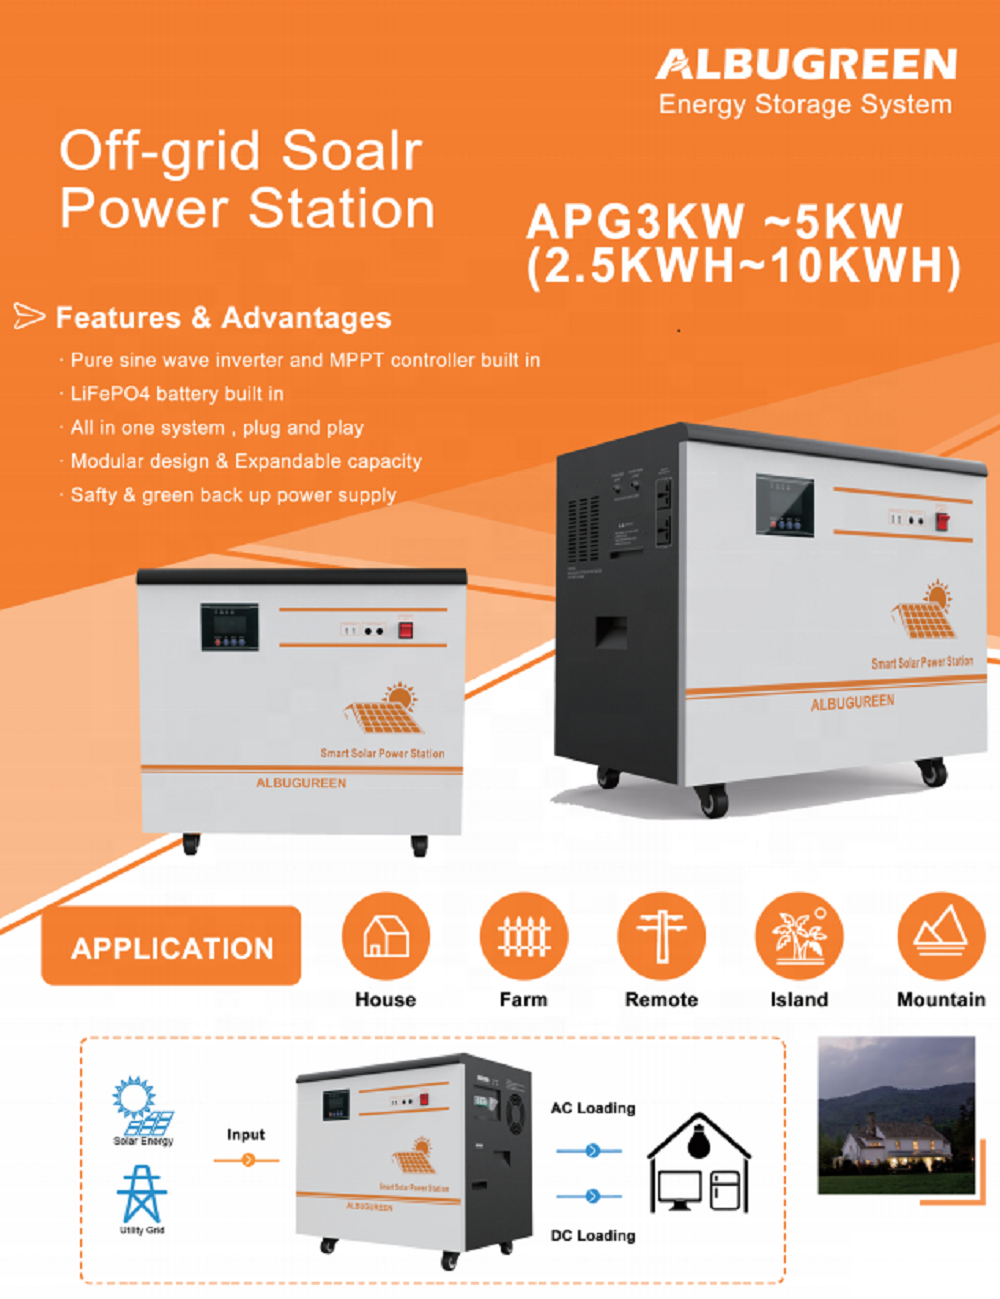 5kw high capacity portable power generator for camper